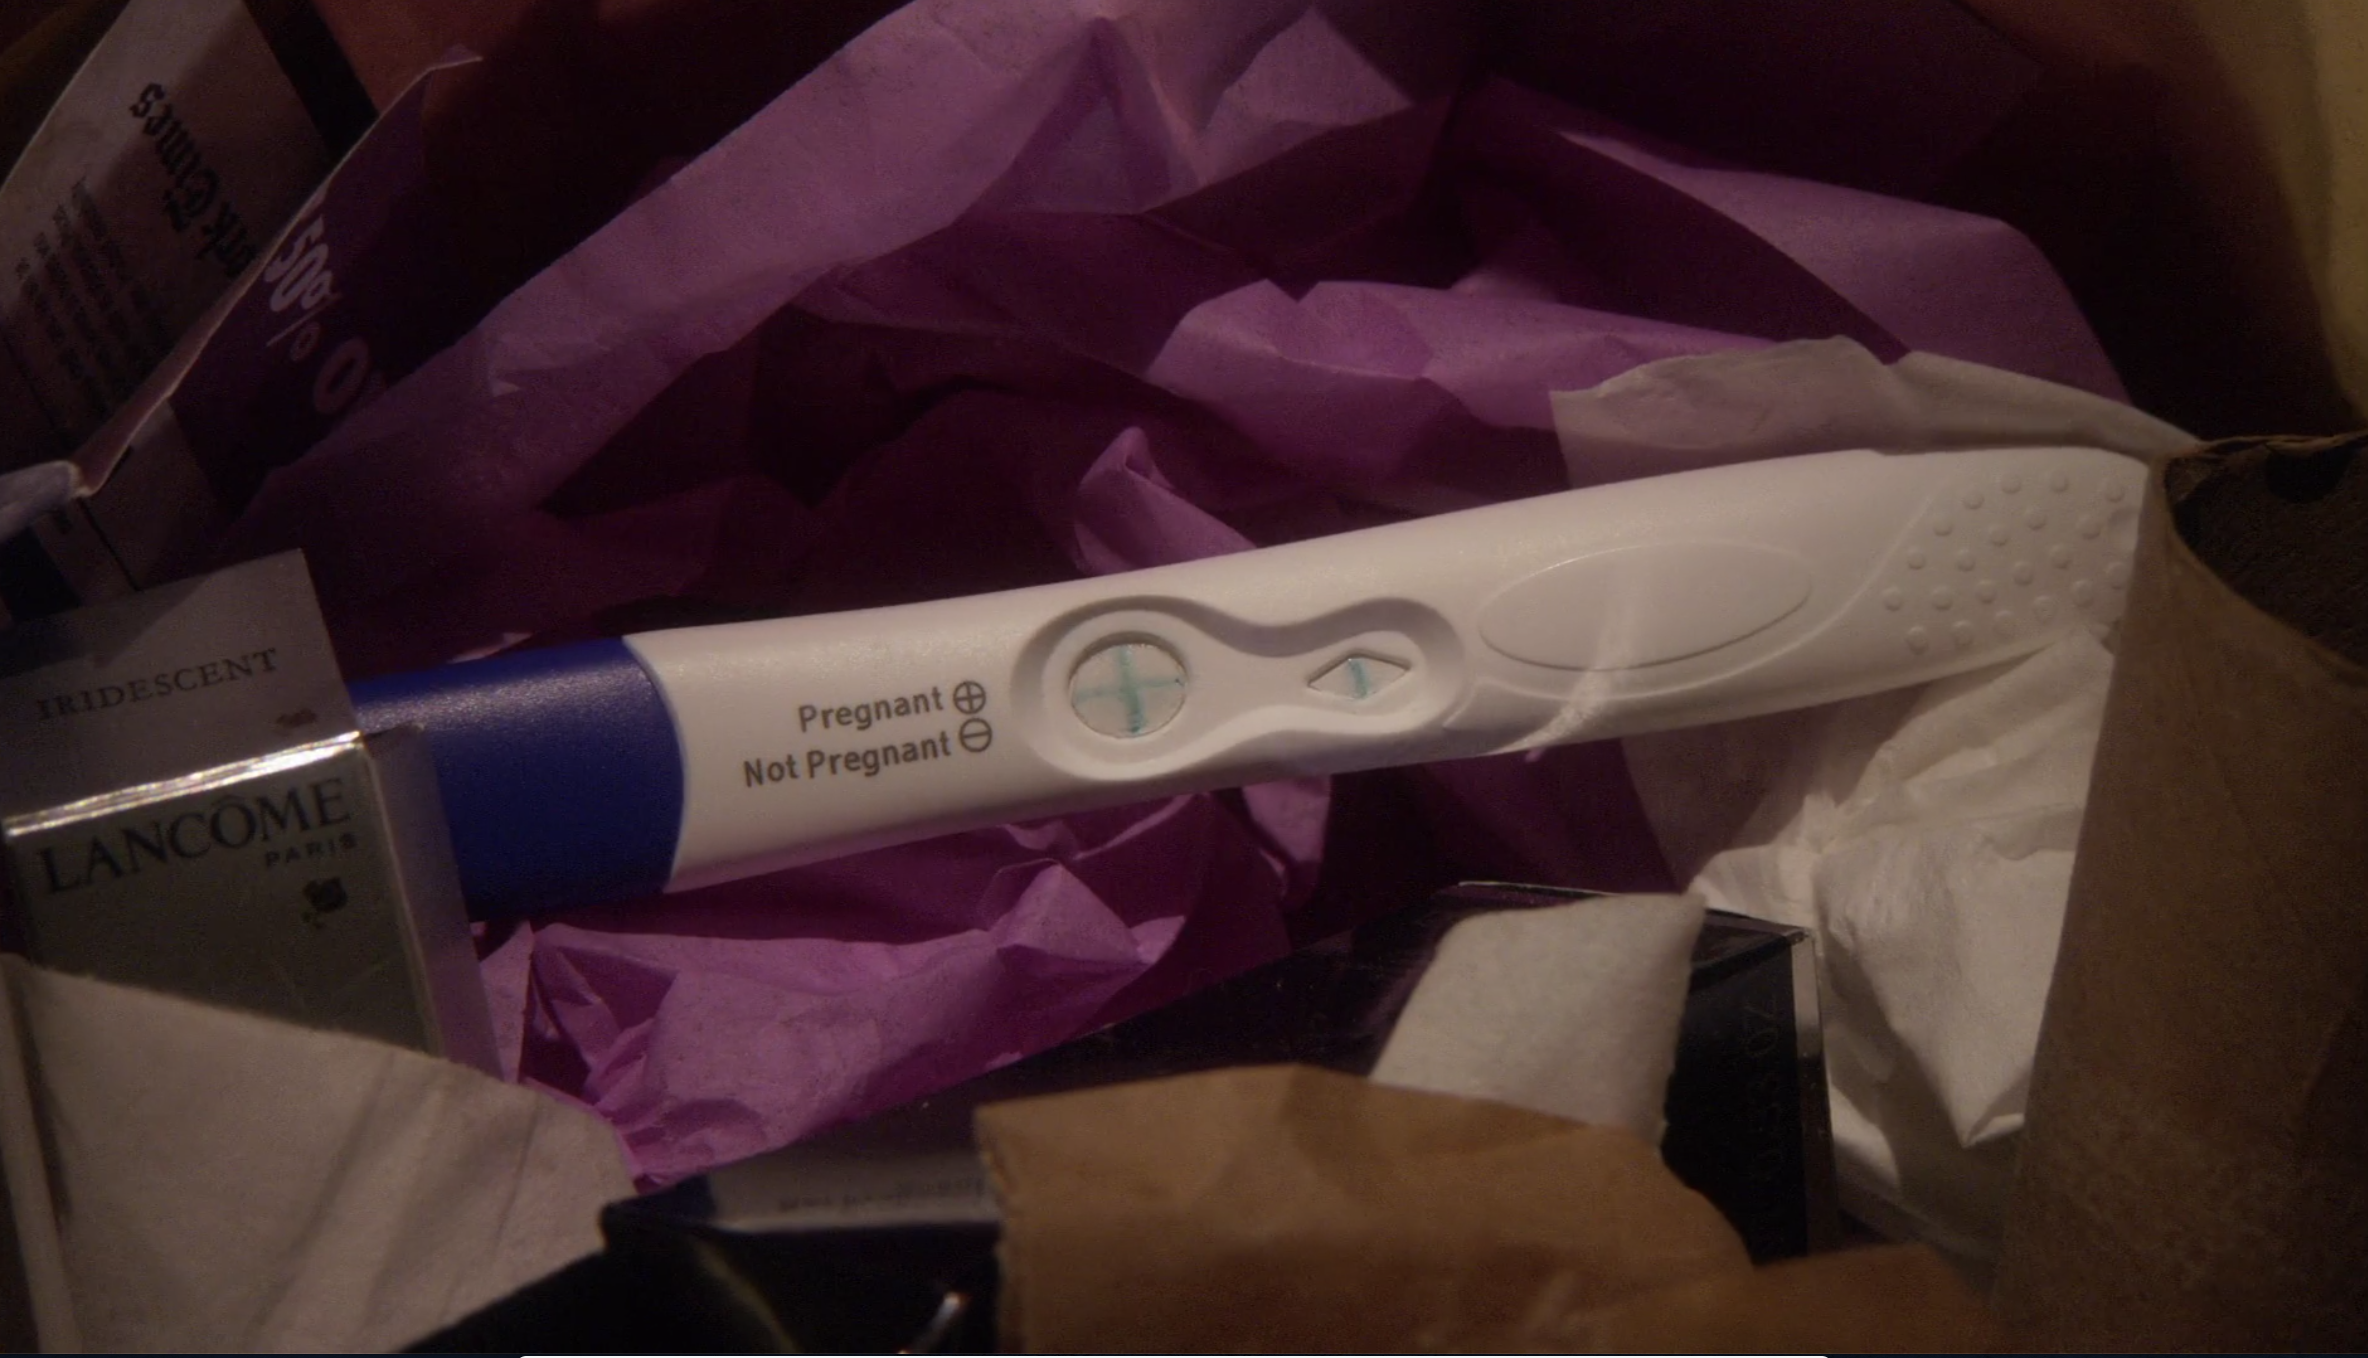 a positive pregnancy test faceup in the trash